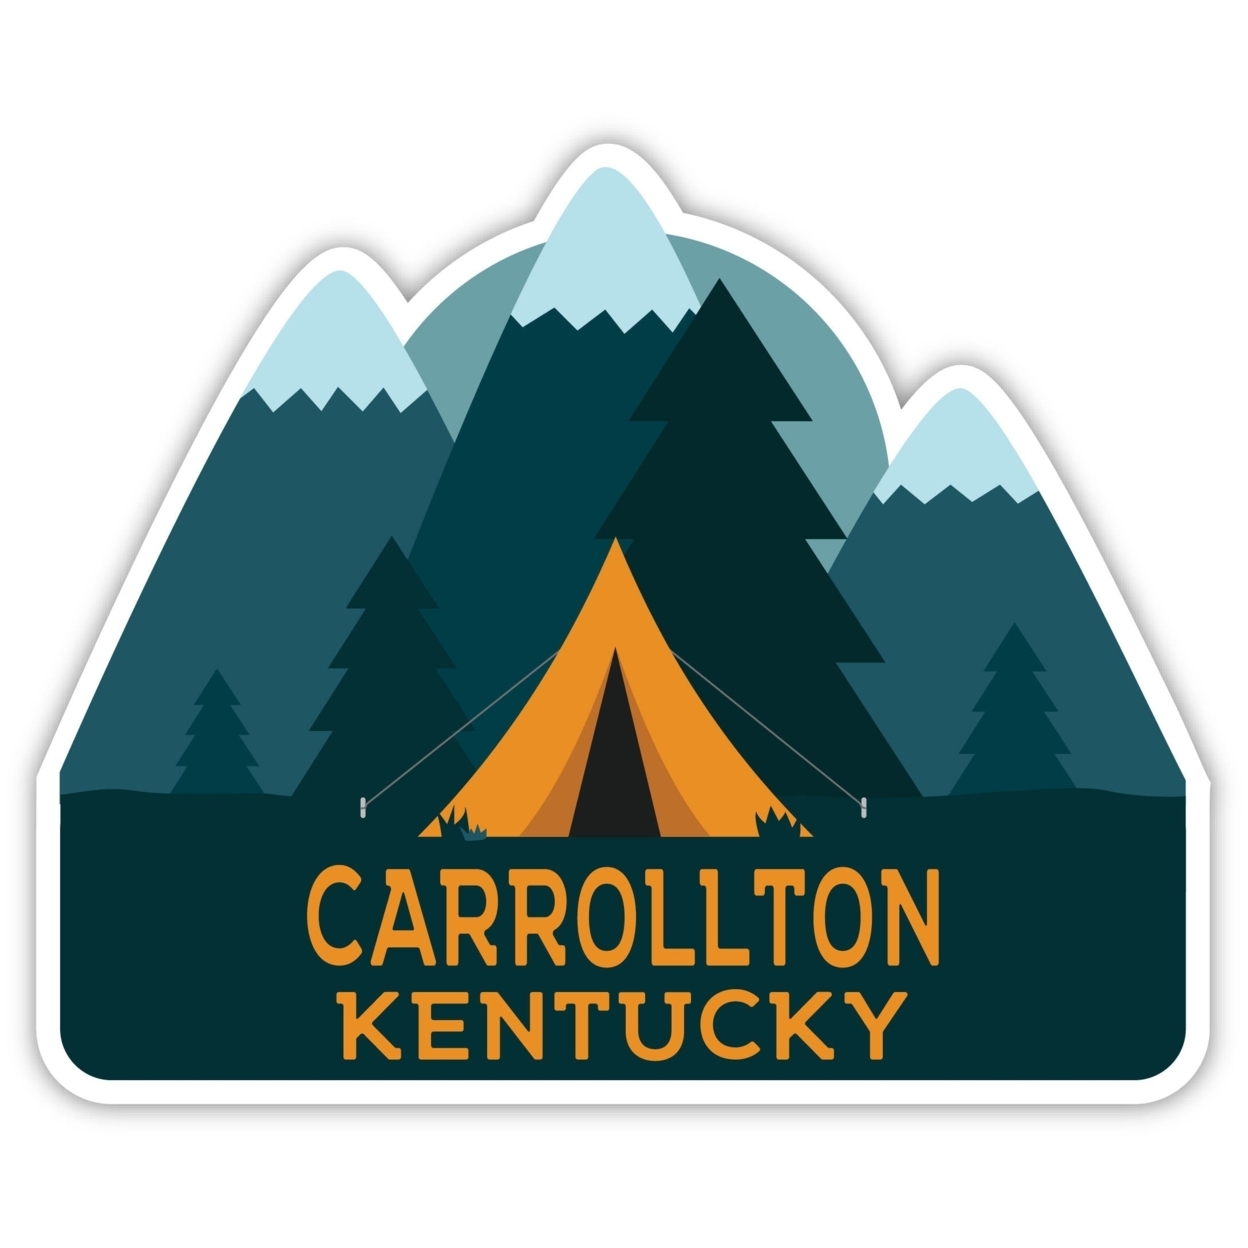 Carrollton Kentucky Souvenir Decorative Stickers (Choose Theme And Size) - 4-Pack, 4-Inch, Tent